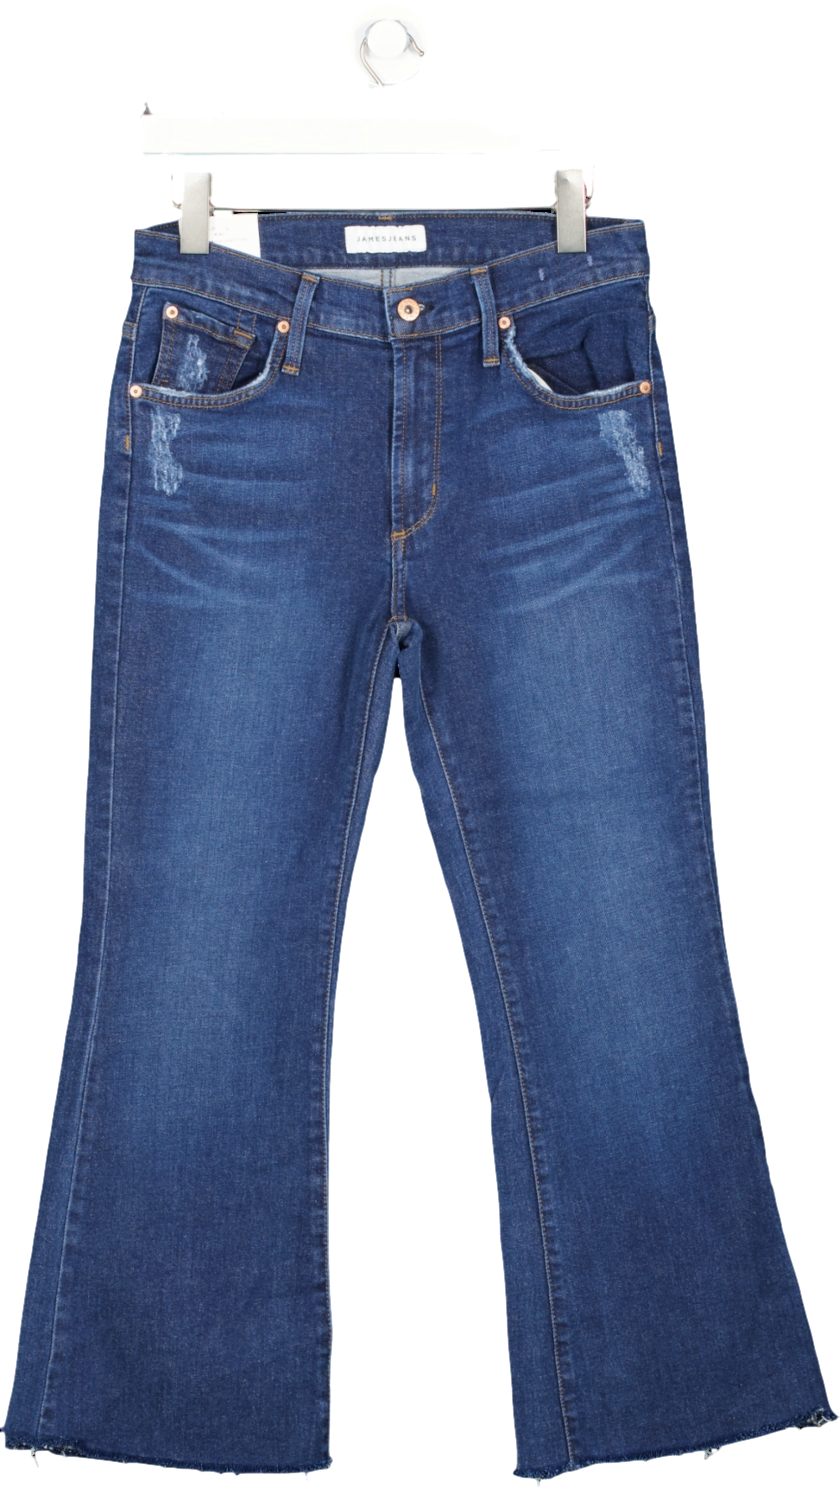 James Jeans Blue Ankle Length Flare Jeans BNWT W24